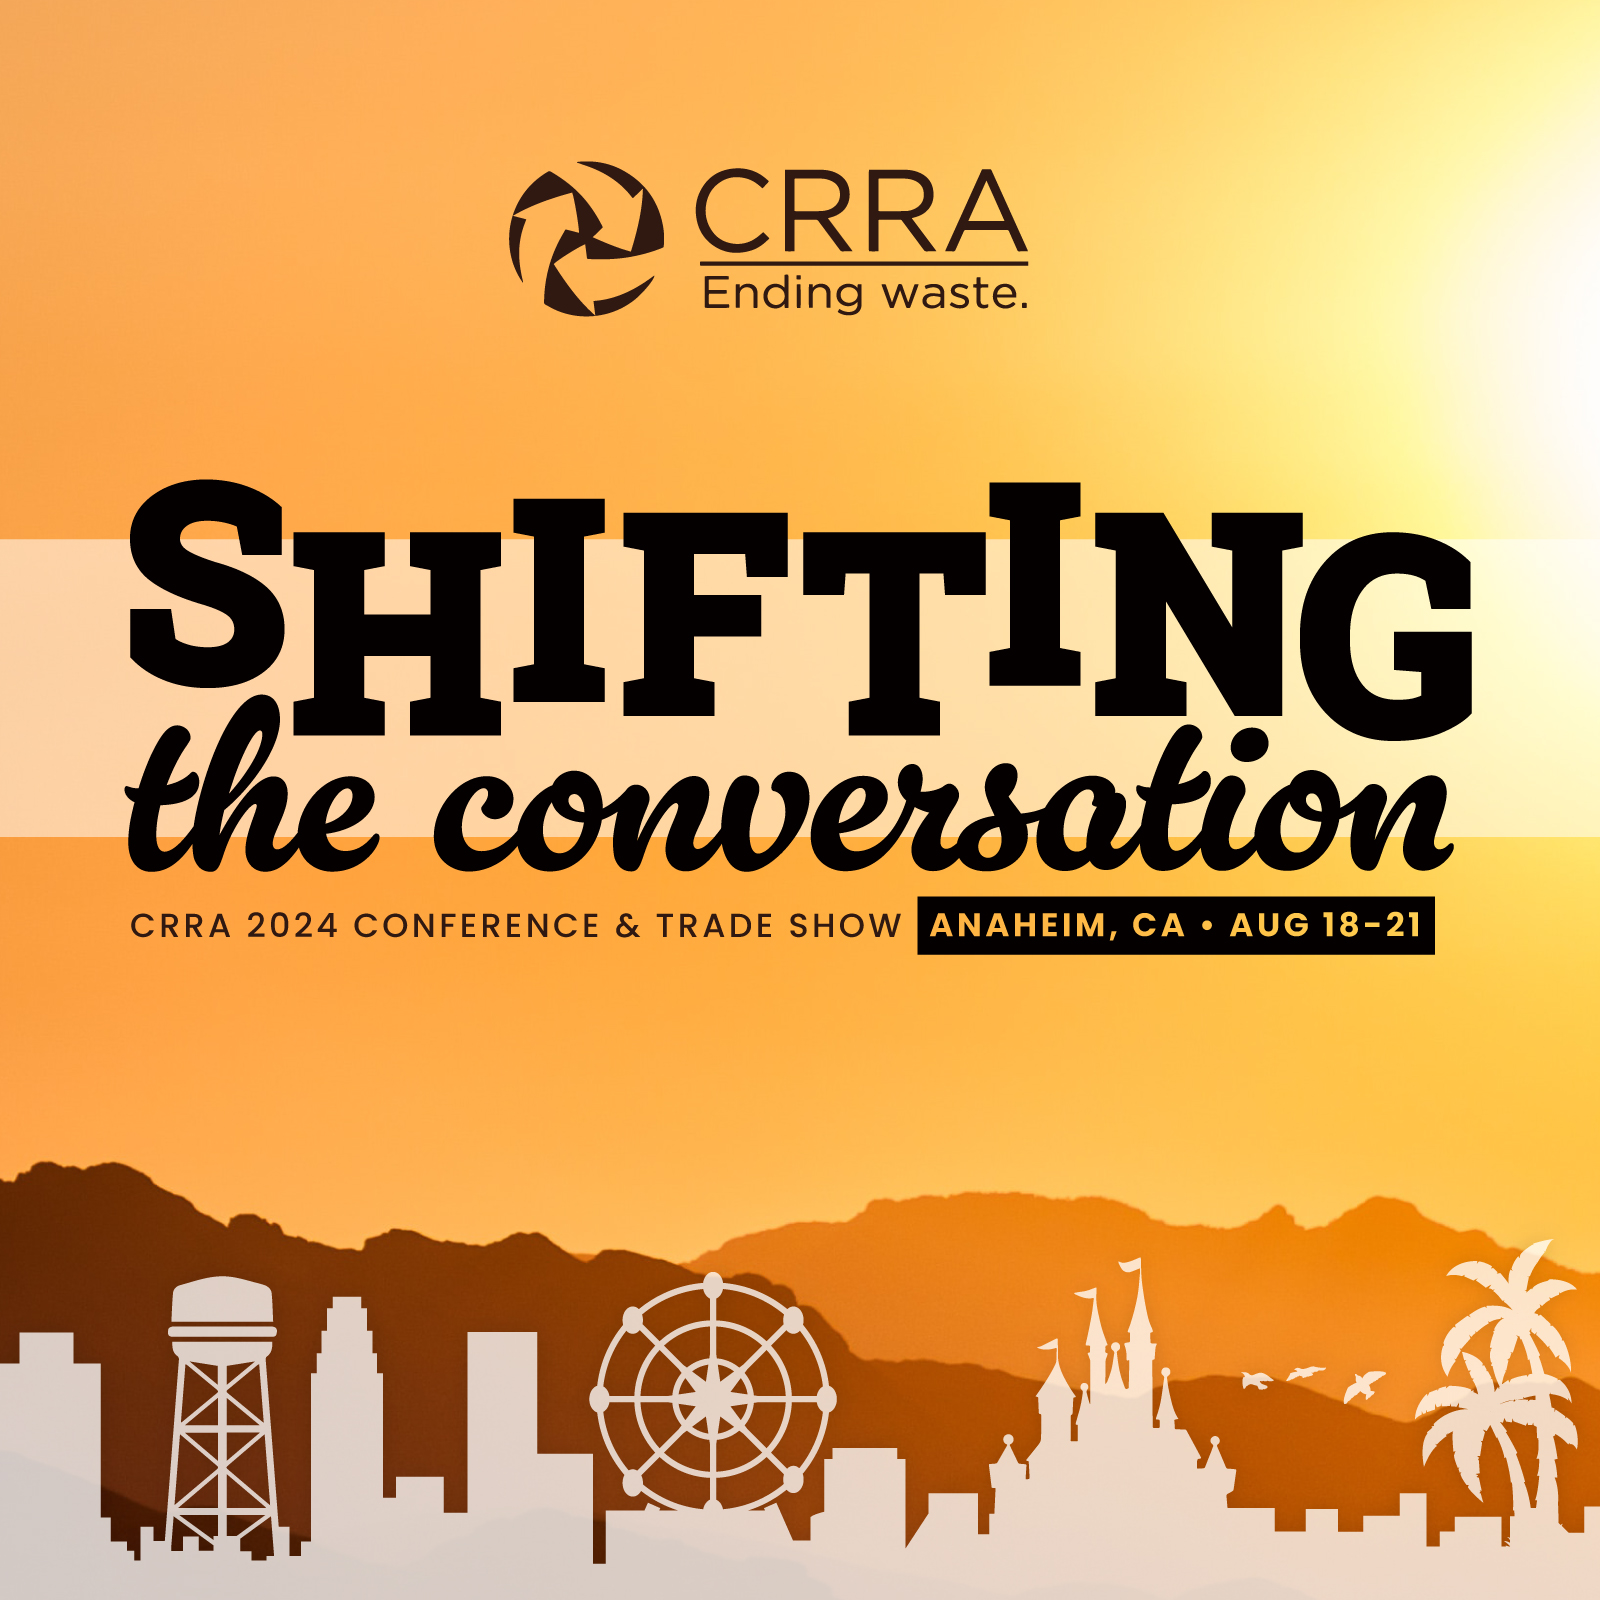 Join us at the CRRA 2024 Conference & Trade Show